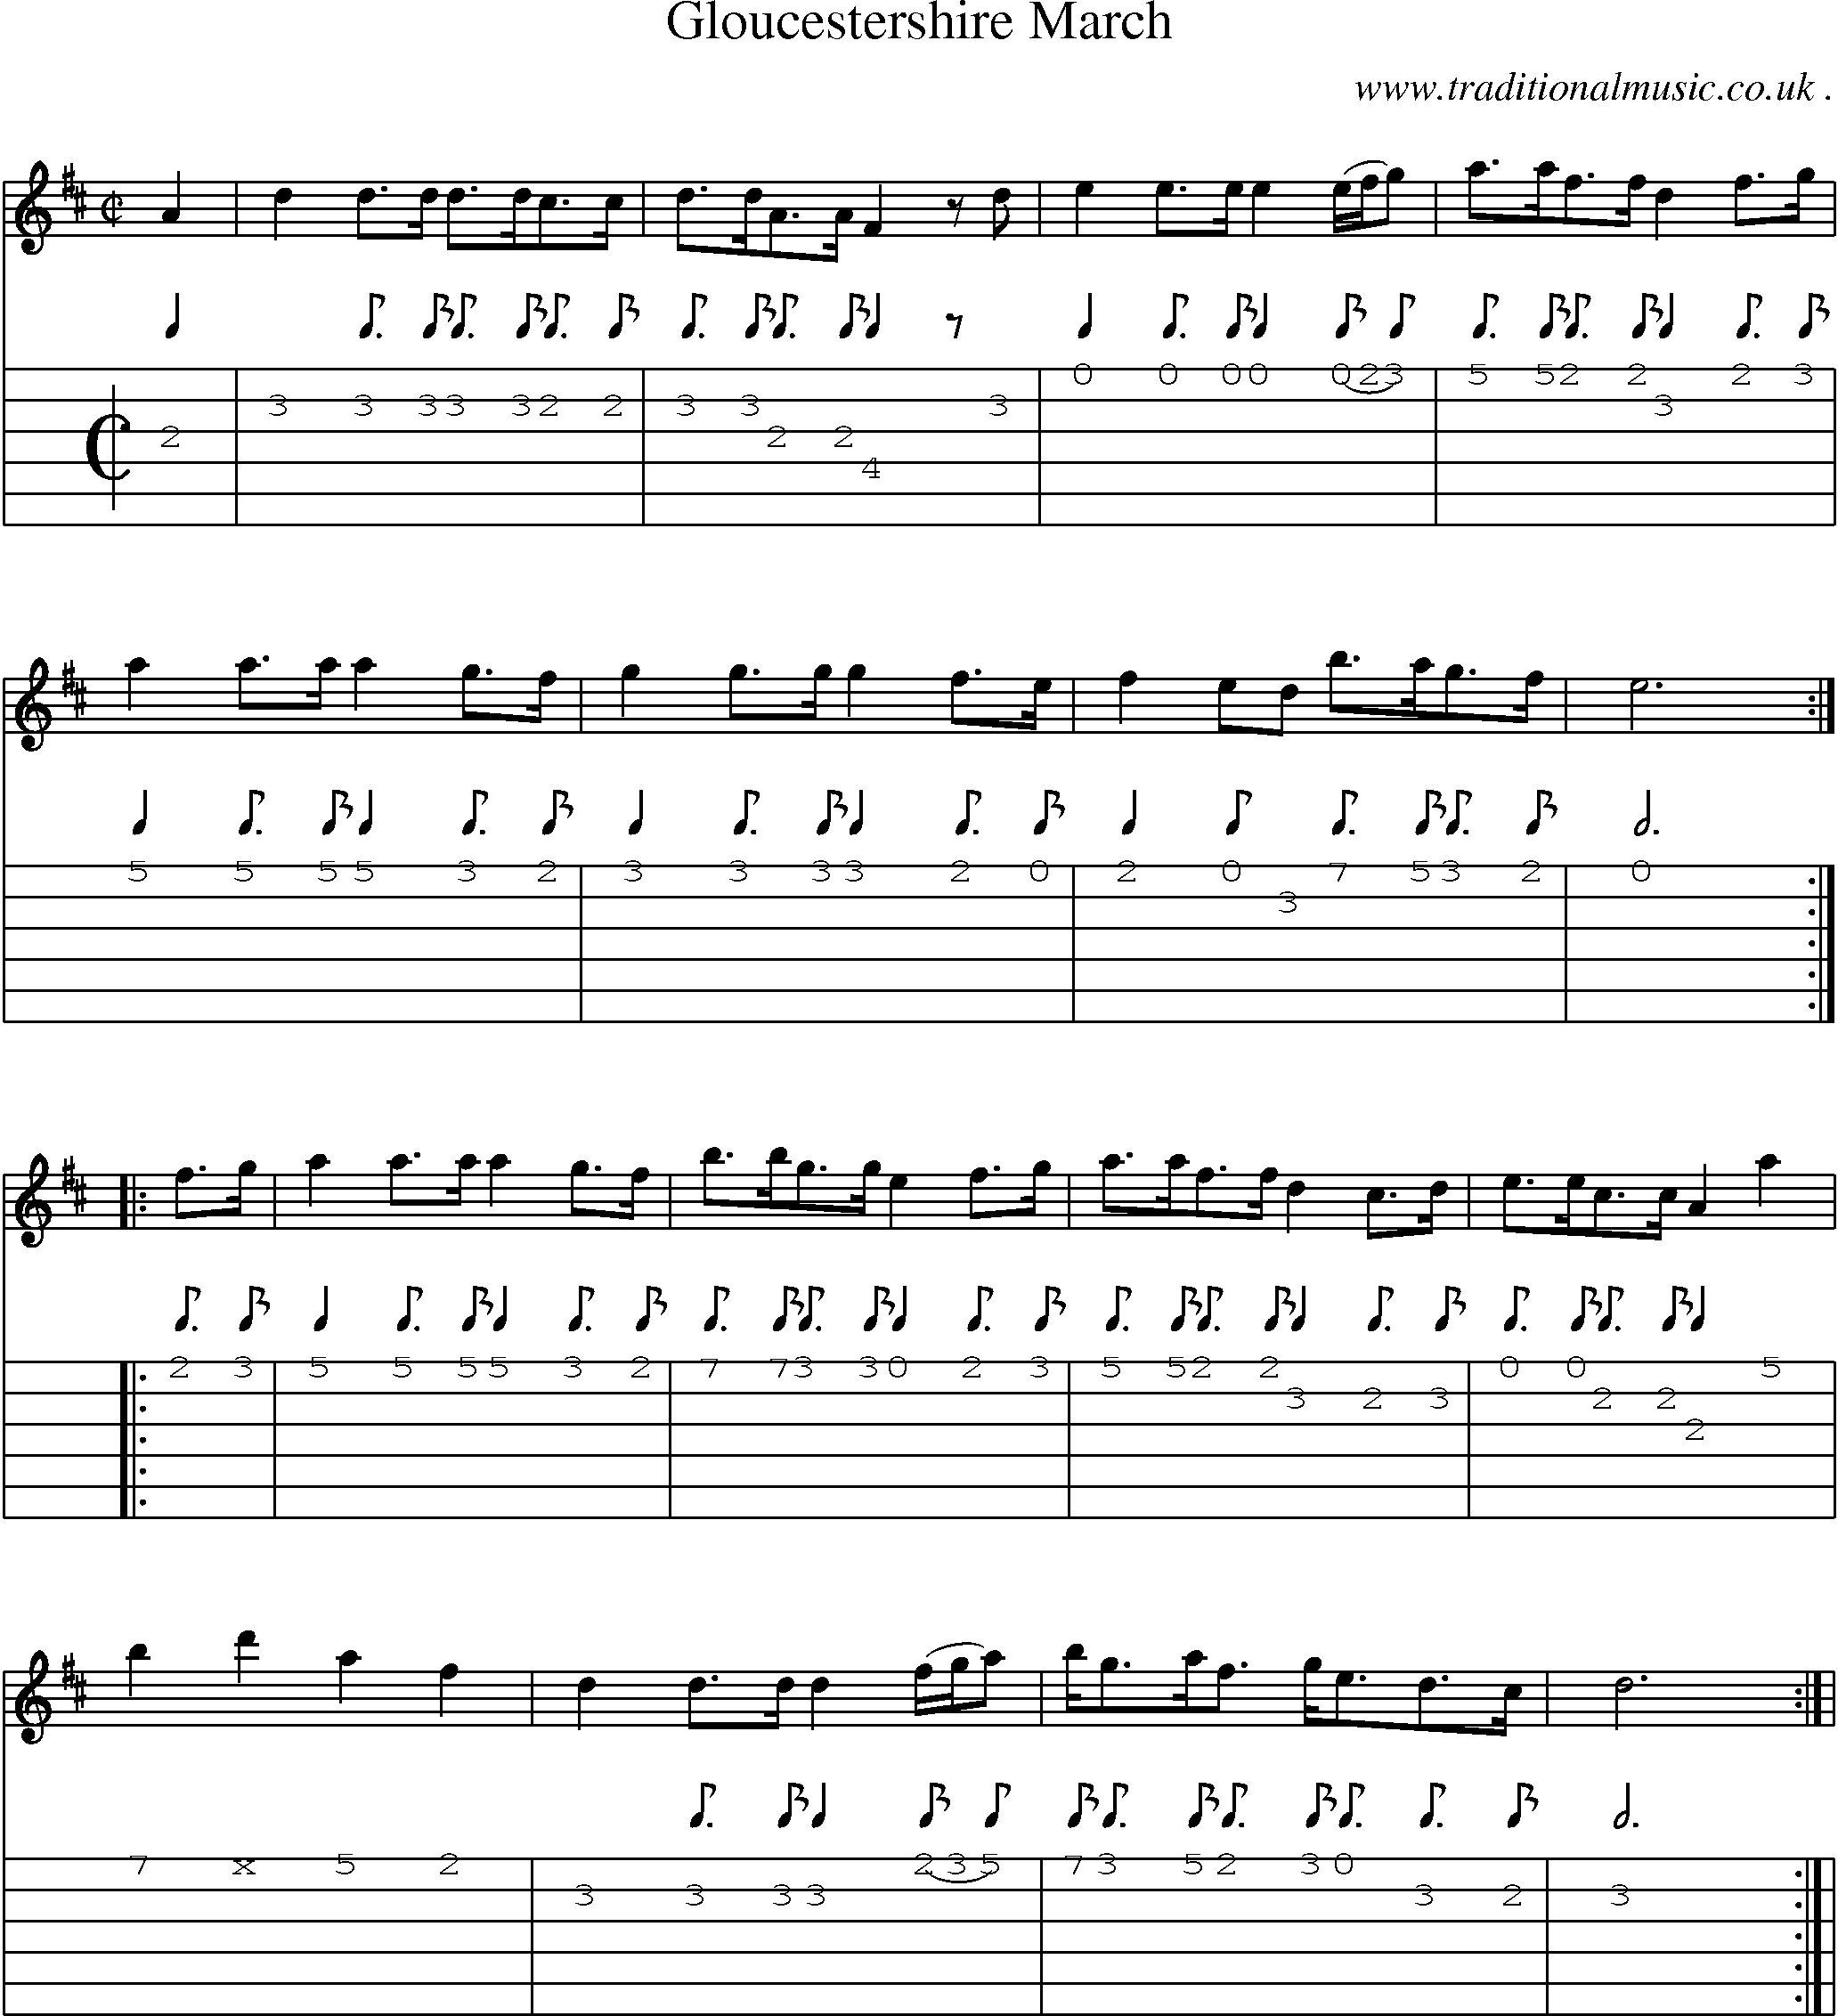 Sheet-Music and Guitar Tabs for Gloucestershire March